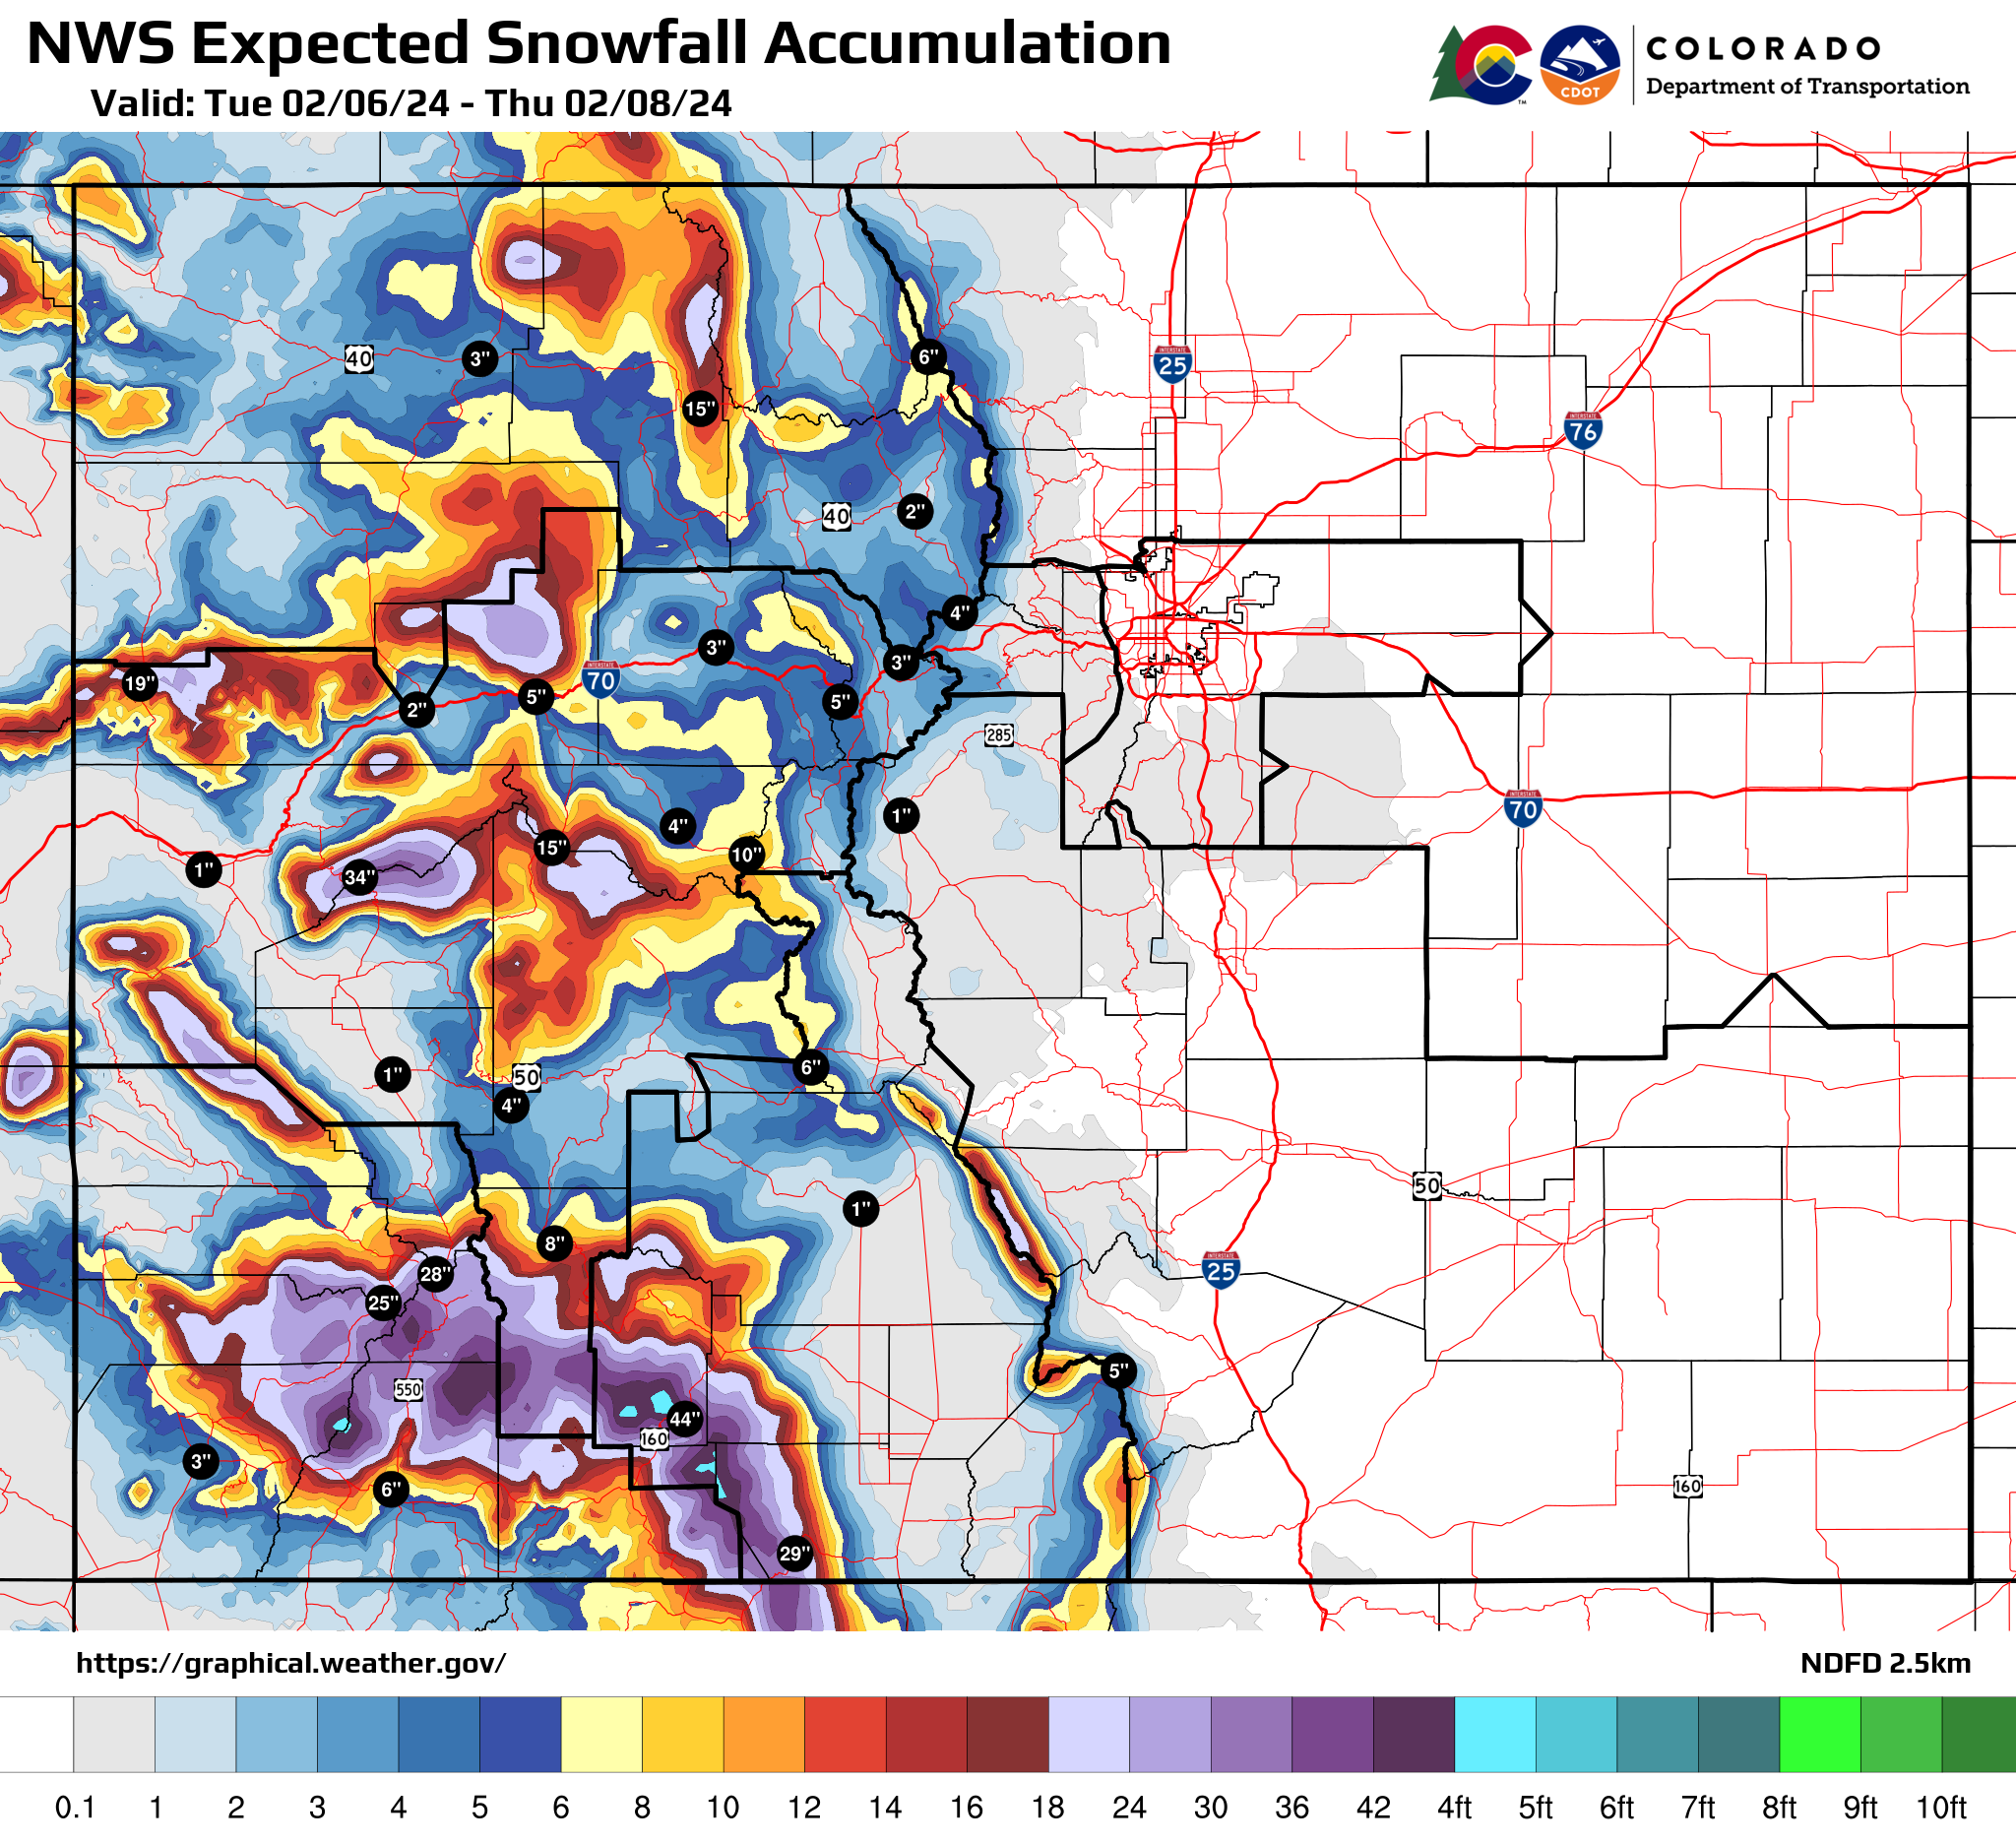 National Weather Service Expected Snowfall Accumulation map for 02062024.png detail image